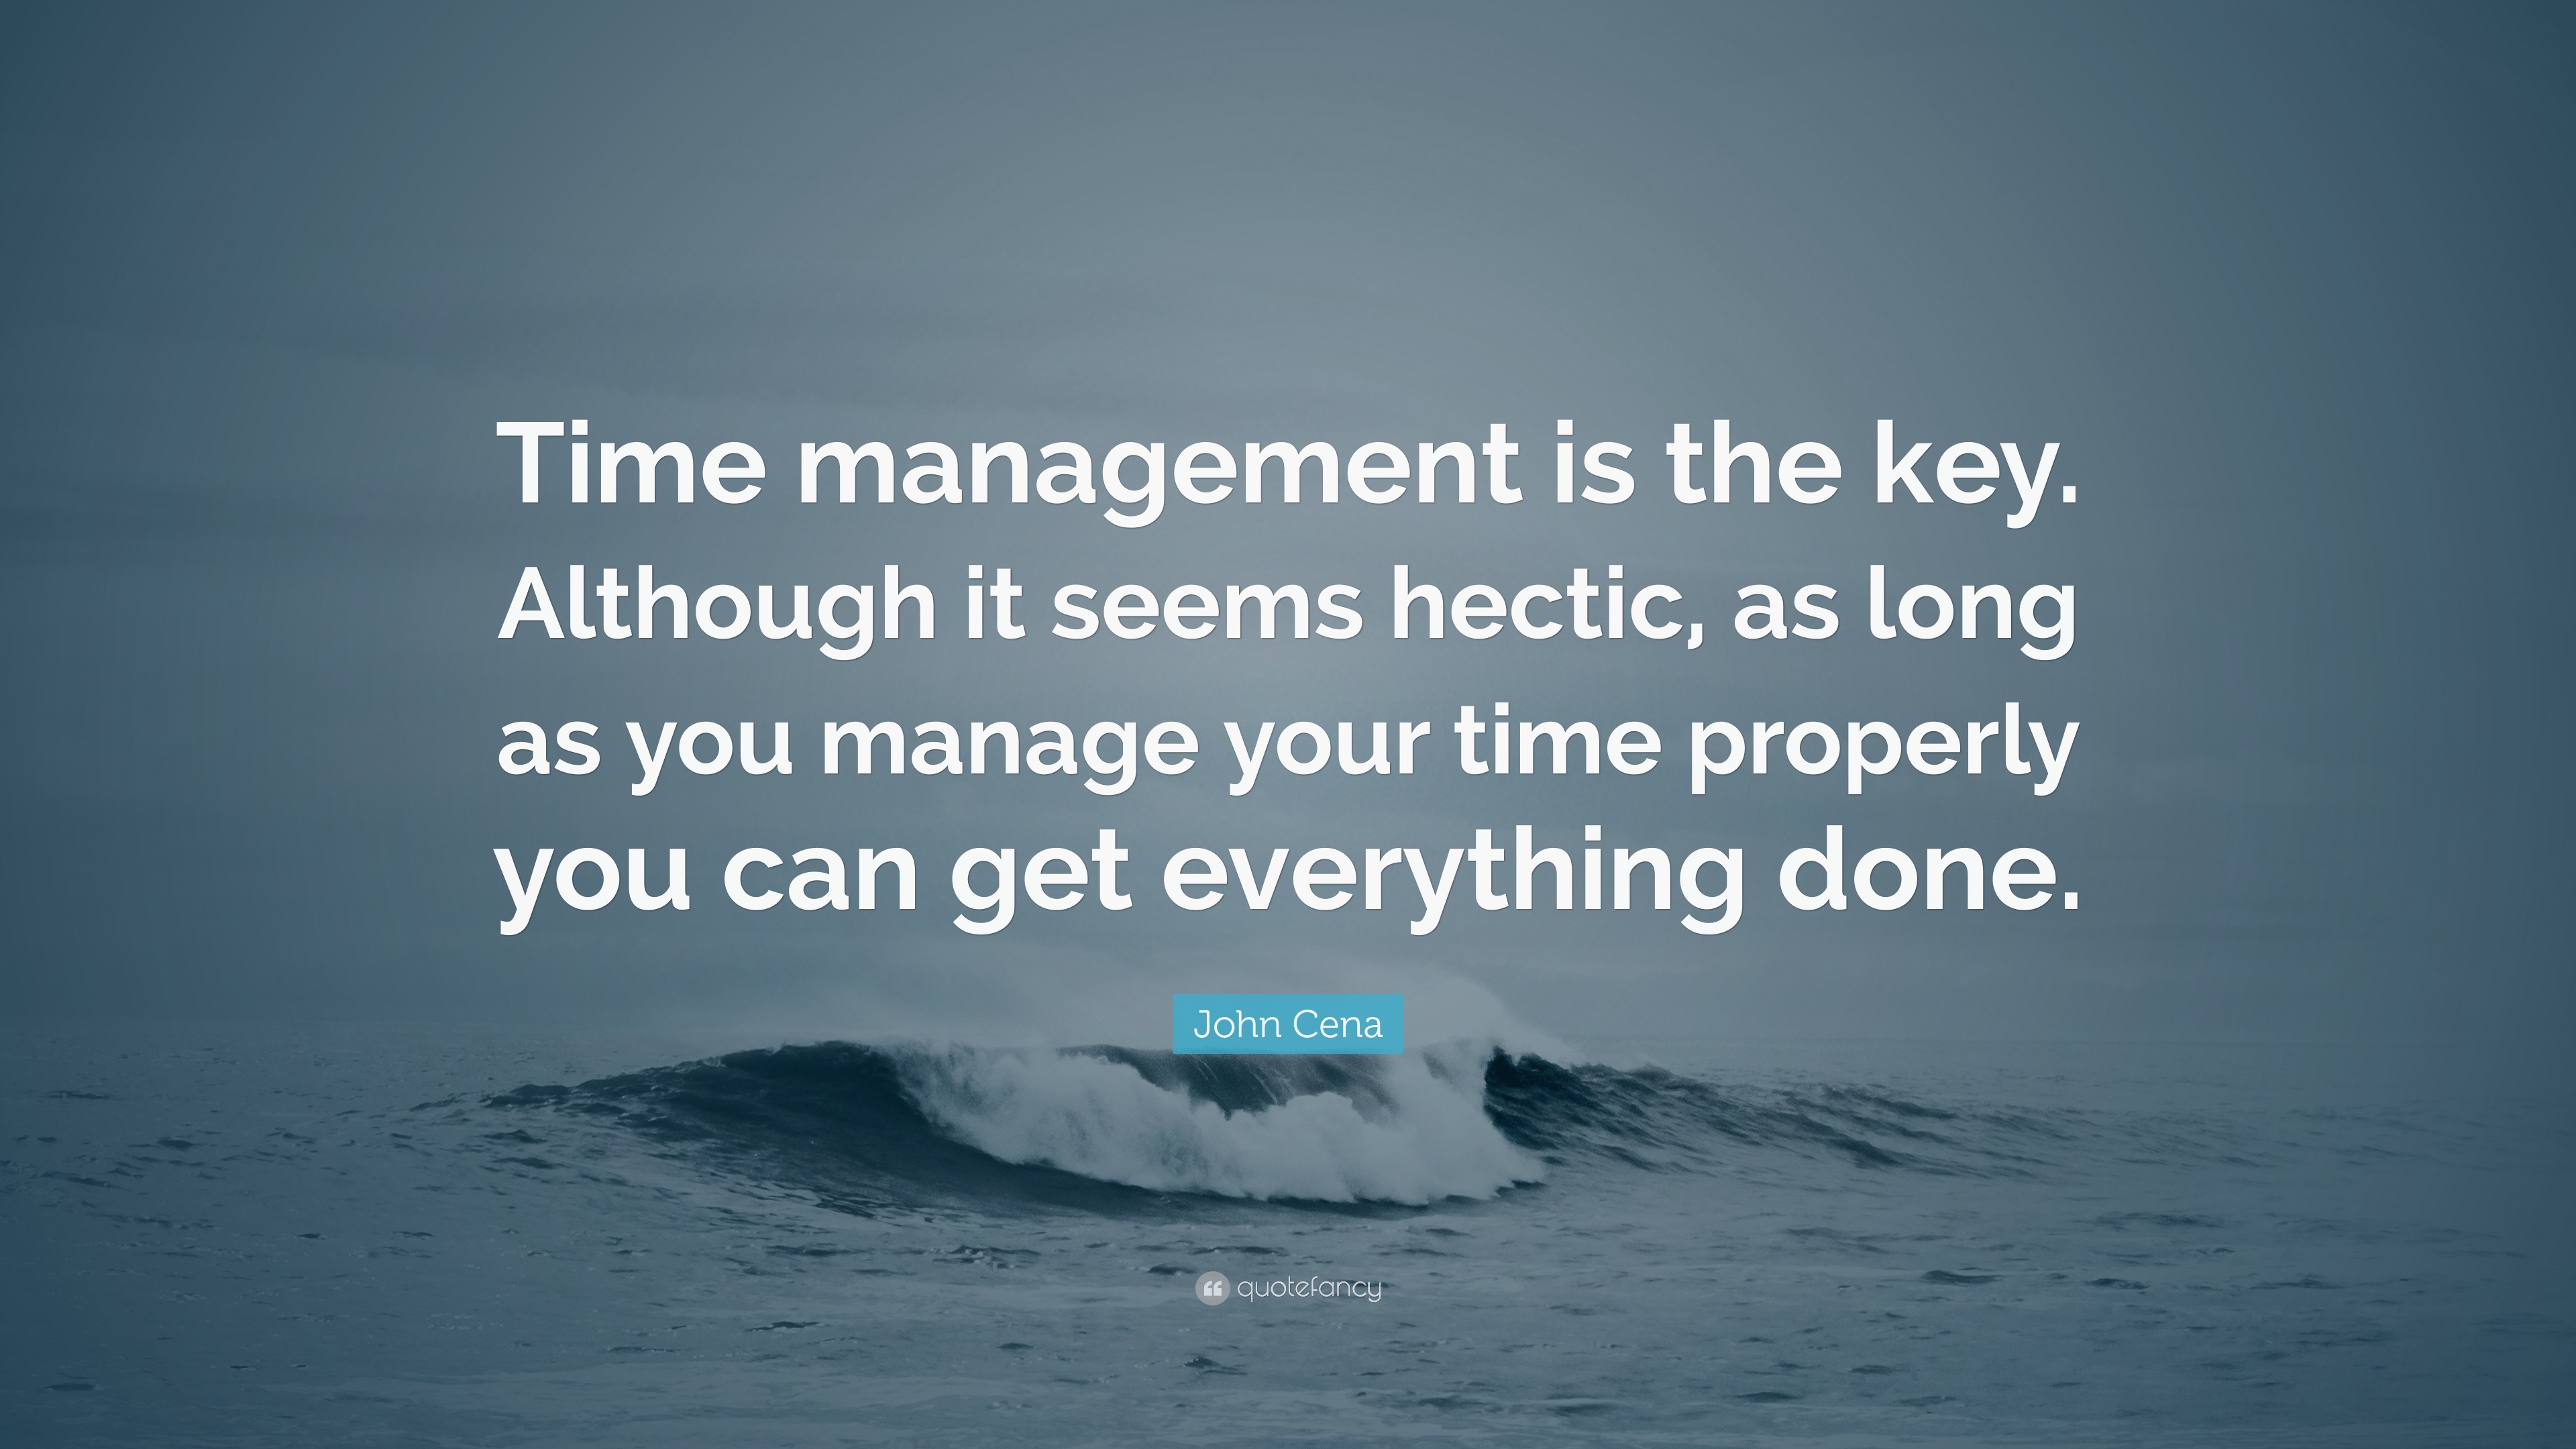 John Cena Quote: “Time management is the key. Although it seems hectic